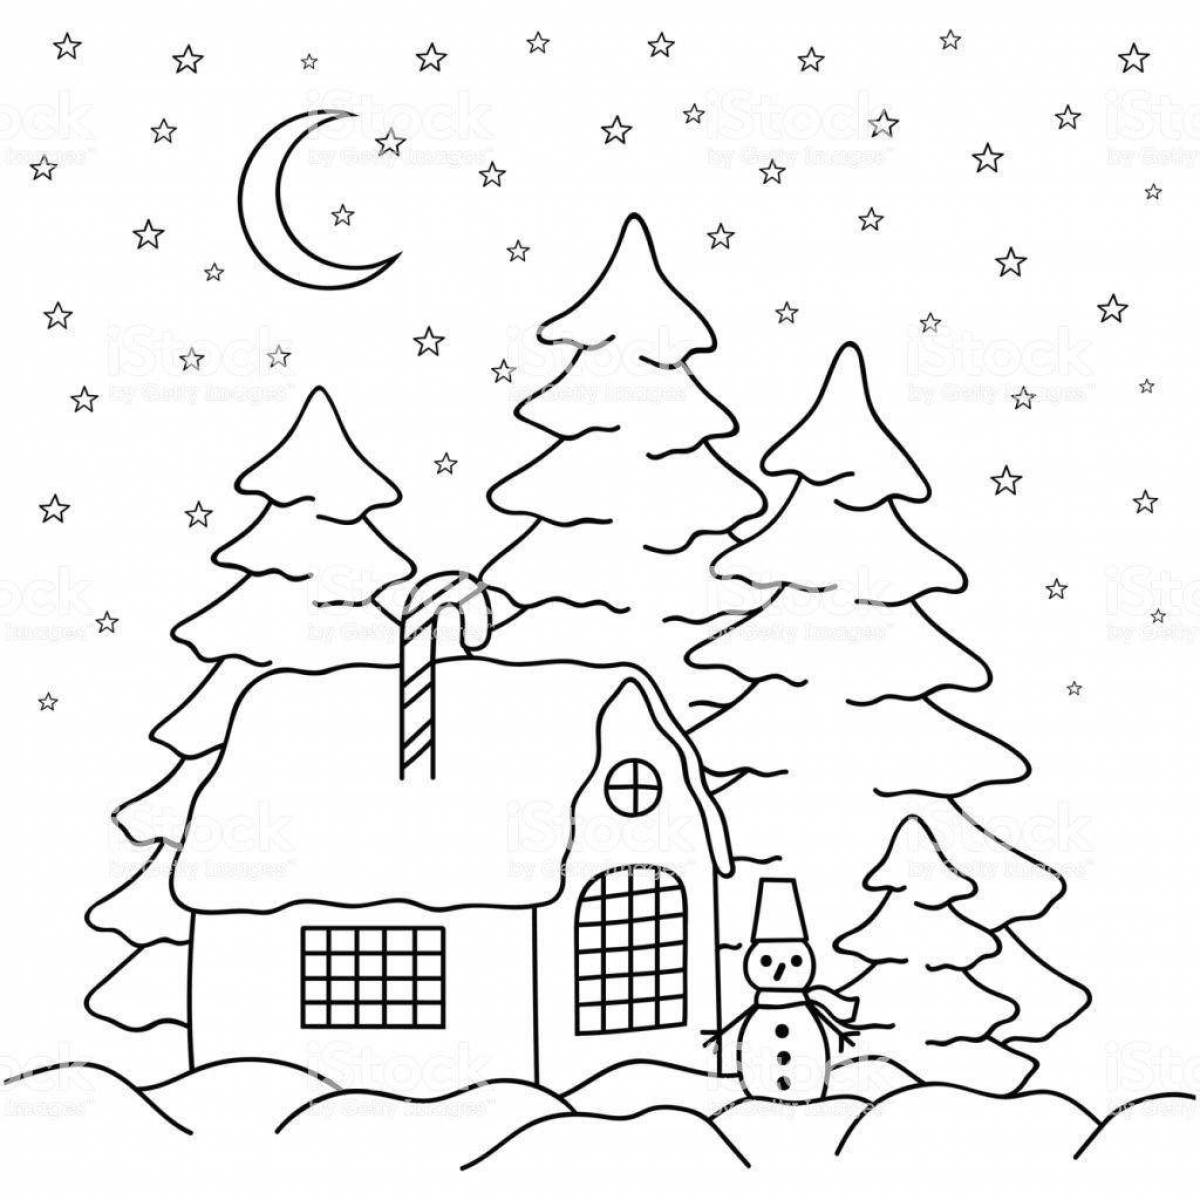 Coloring page cozy tree house